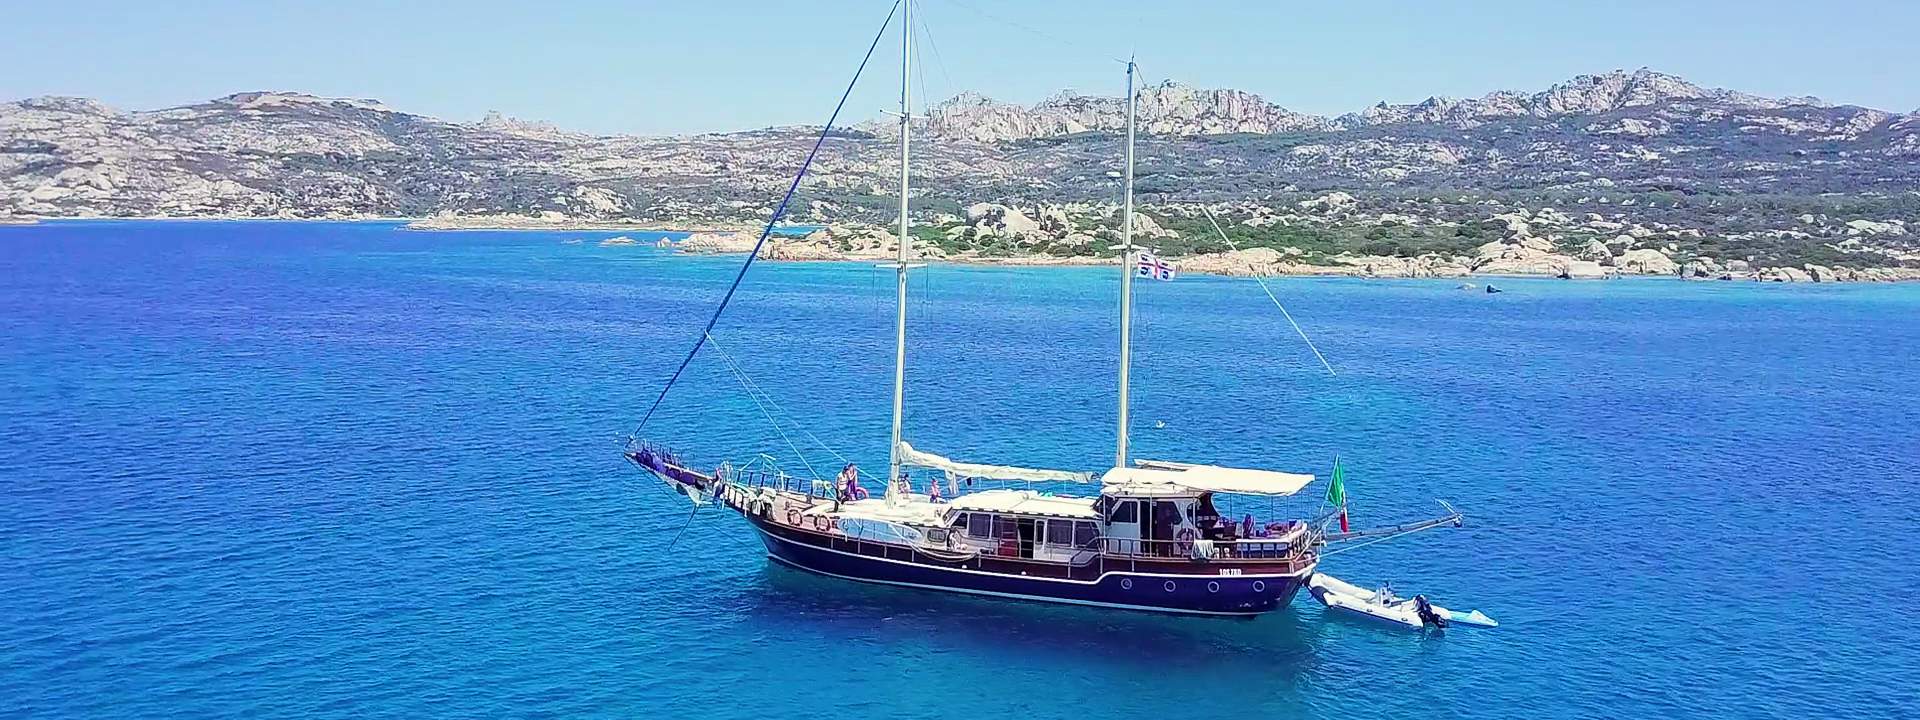 Cabin Cruise on board a gulet in the Maddalena islands